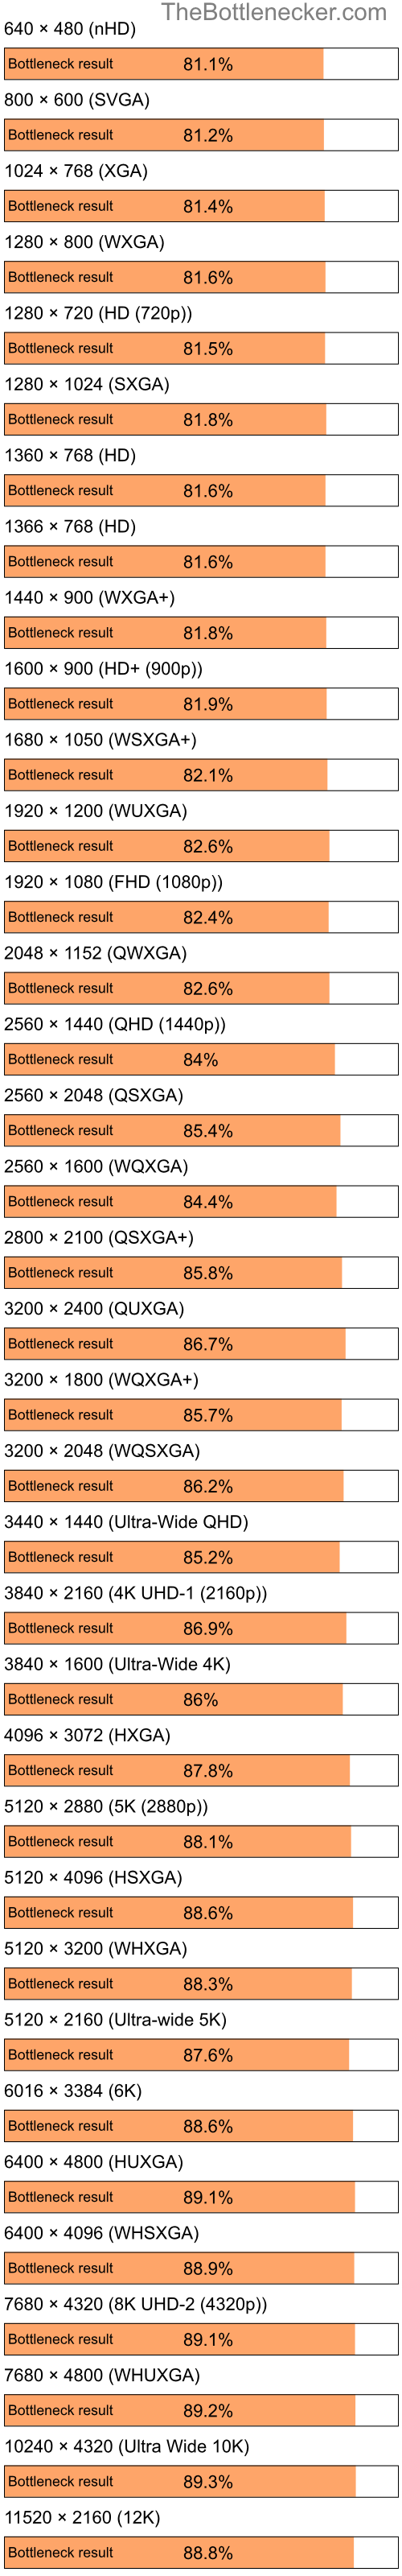 Bottleneck results by resolution for Intel Pentium 4 and NVIDIA GeForce 6100 in Graphic Card Intense Tasks